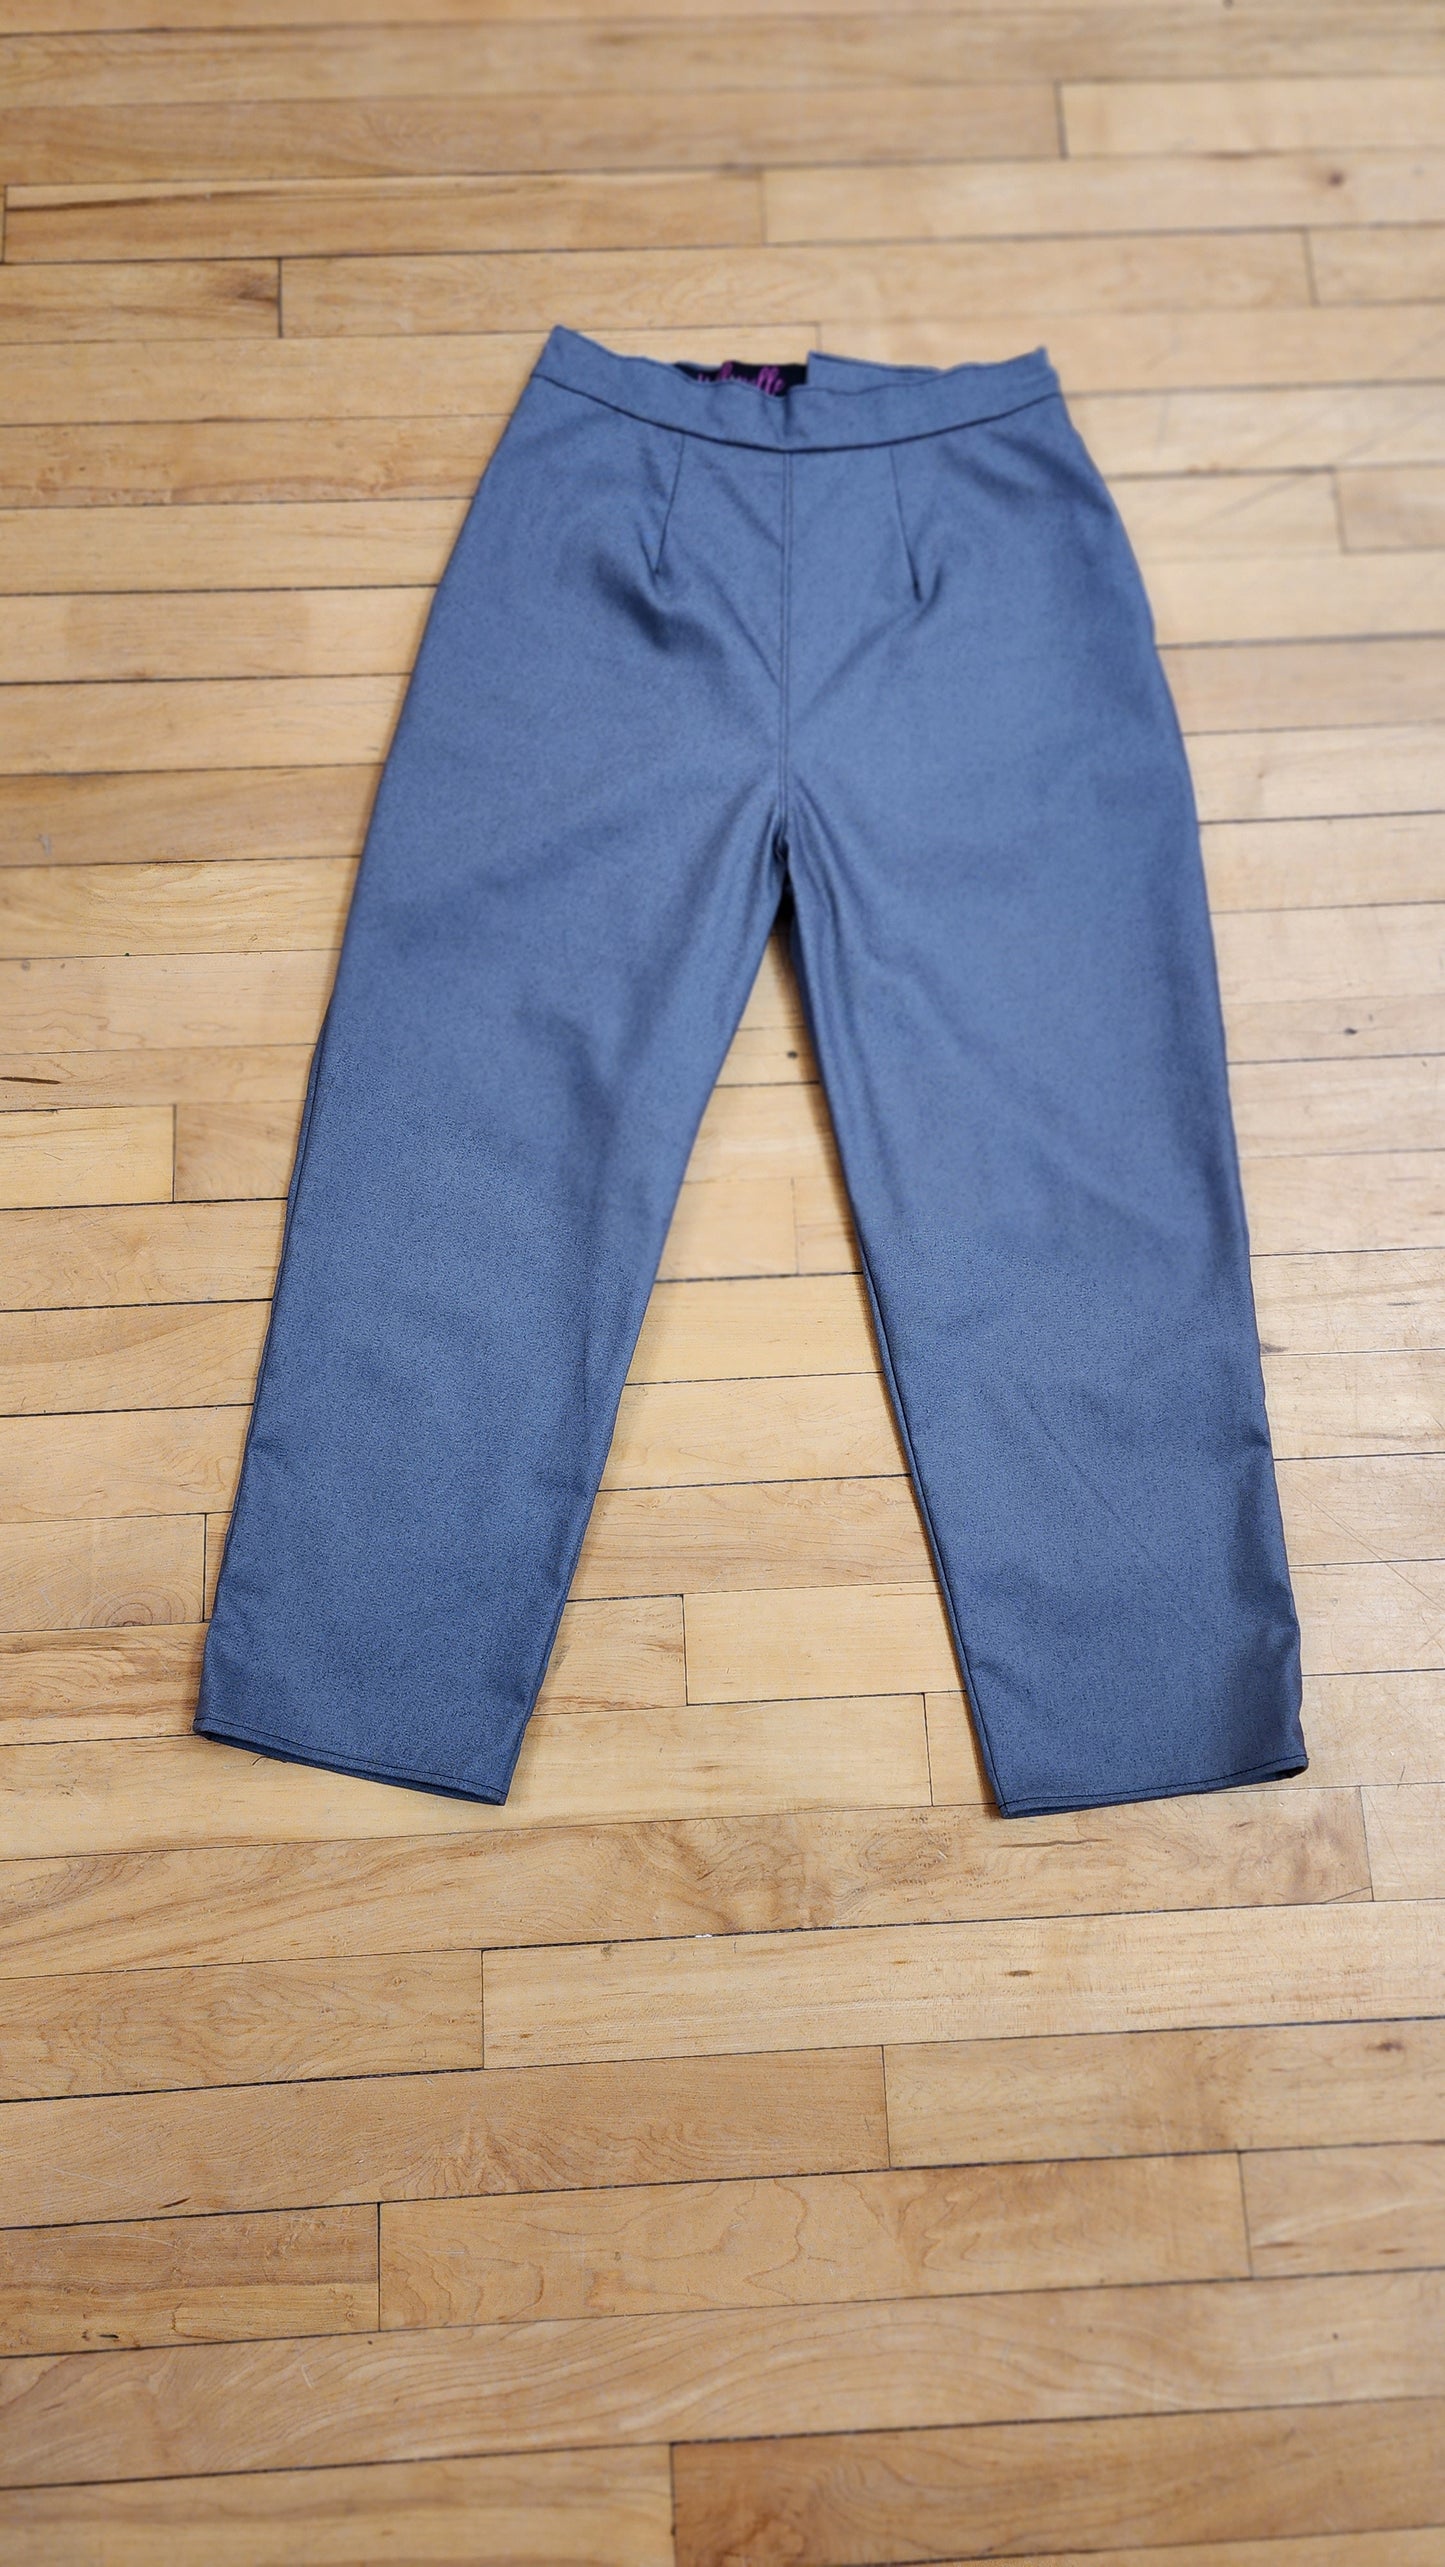 Grey Capris by Hollyville